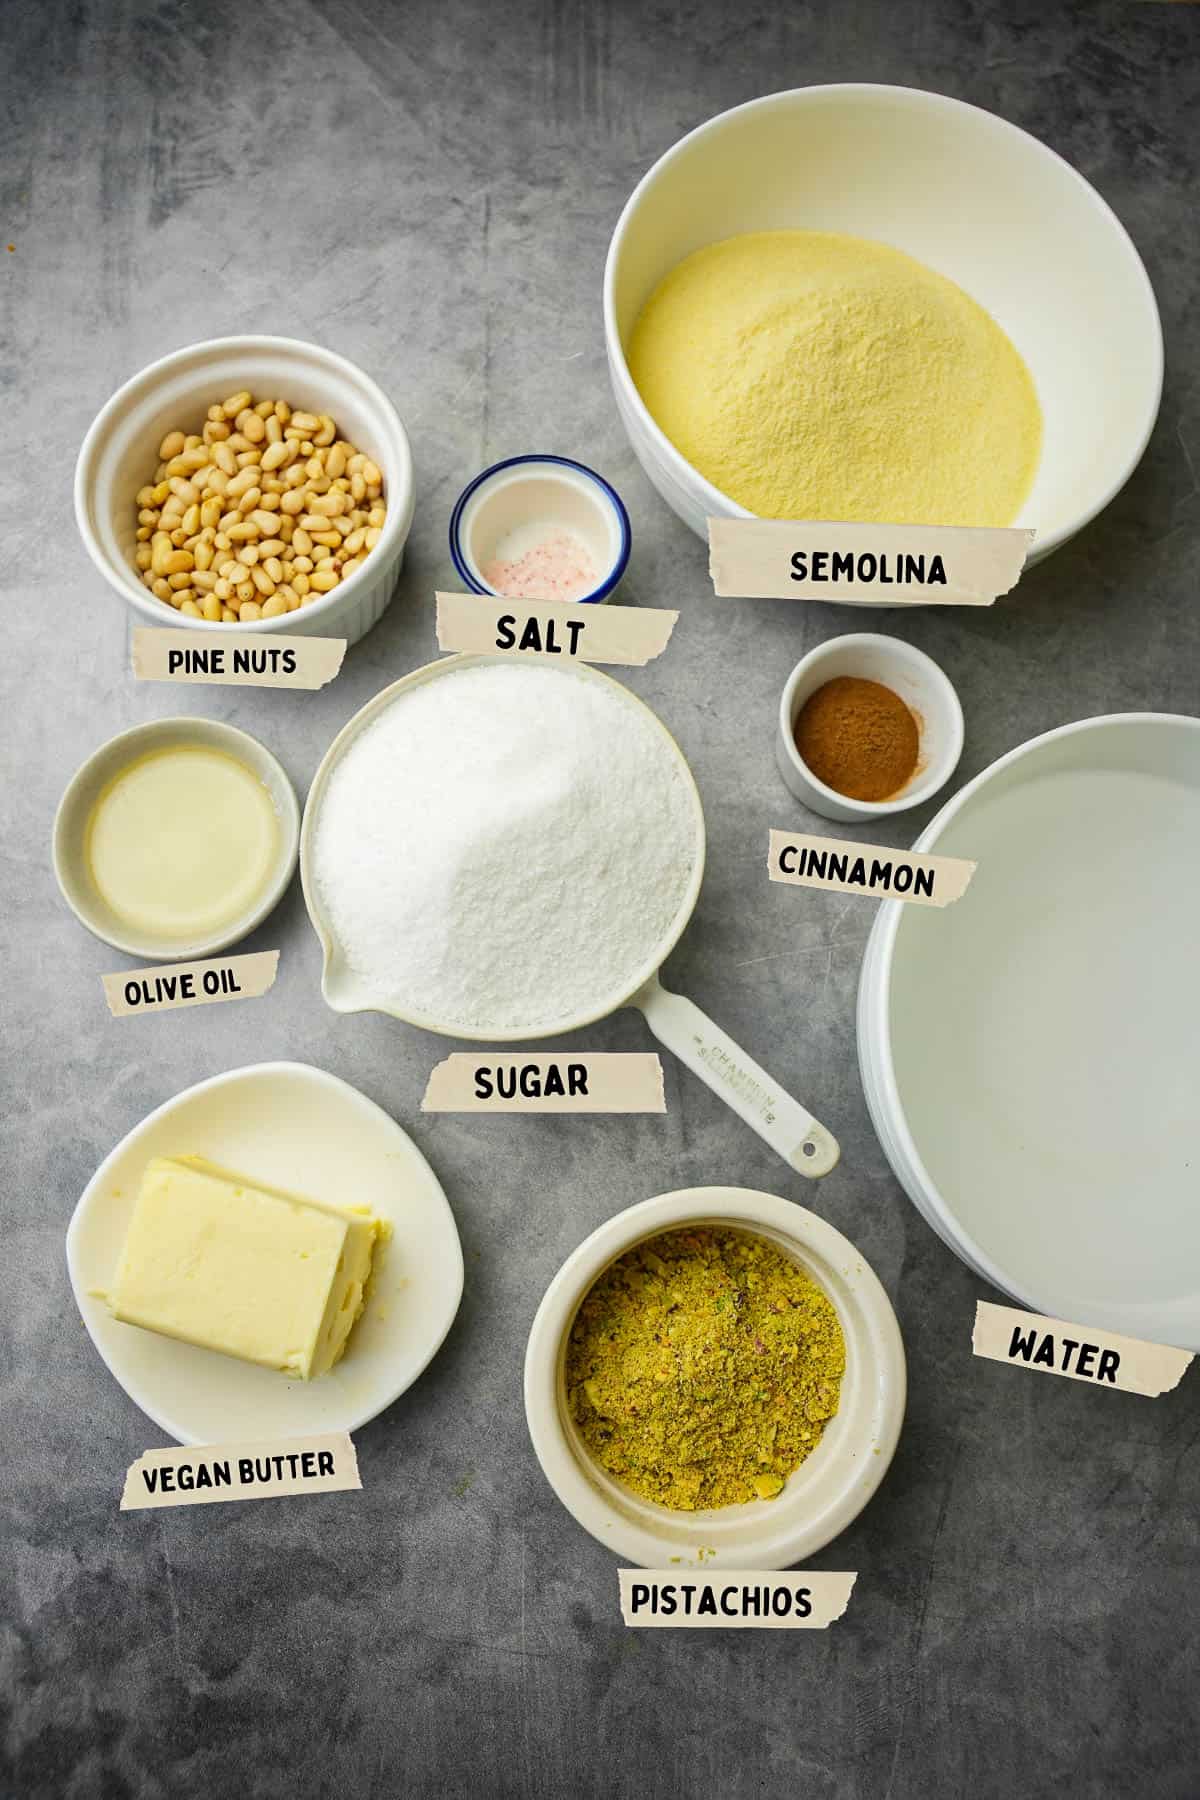 Ingredients for making Irmik helvasi measured out in bowls and labeled with the names of the ingredients.